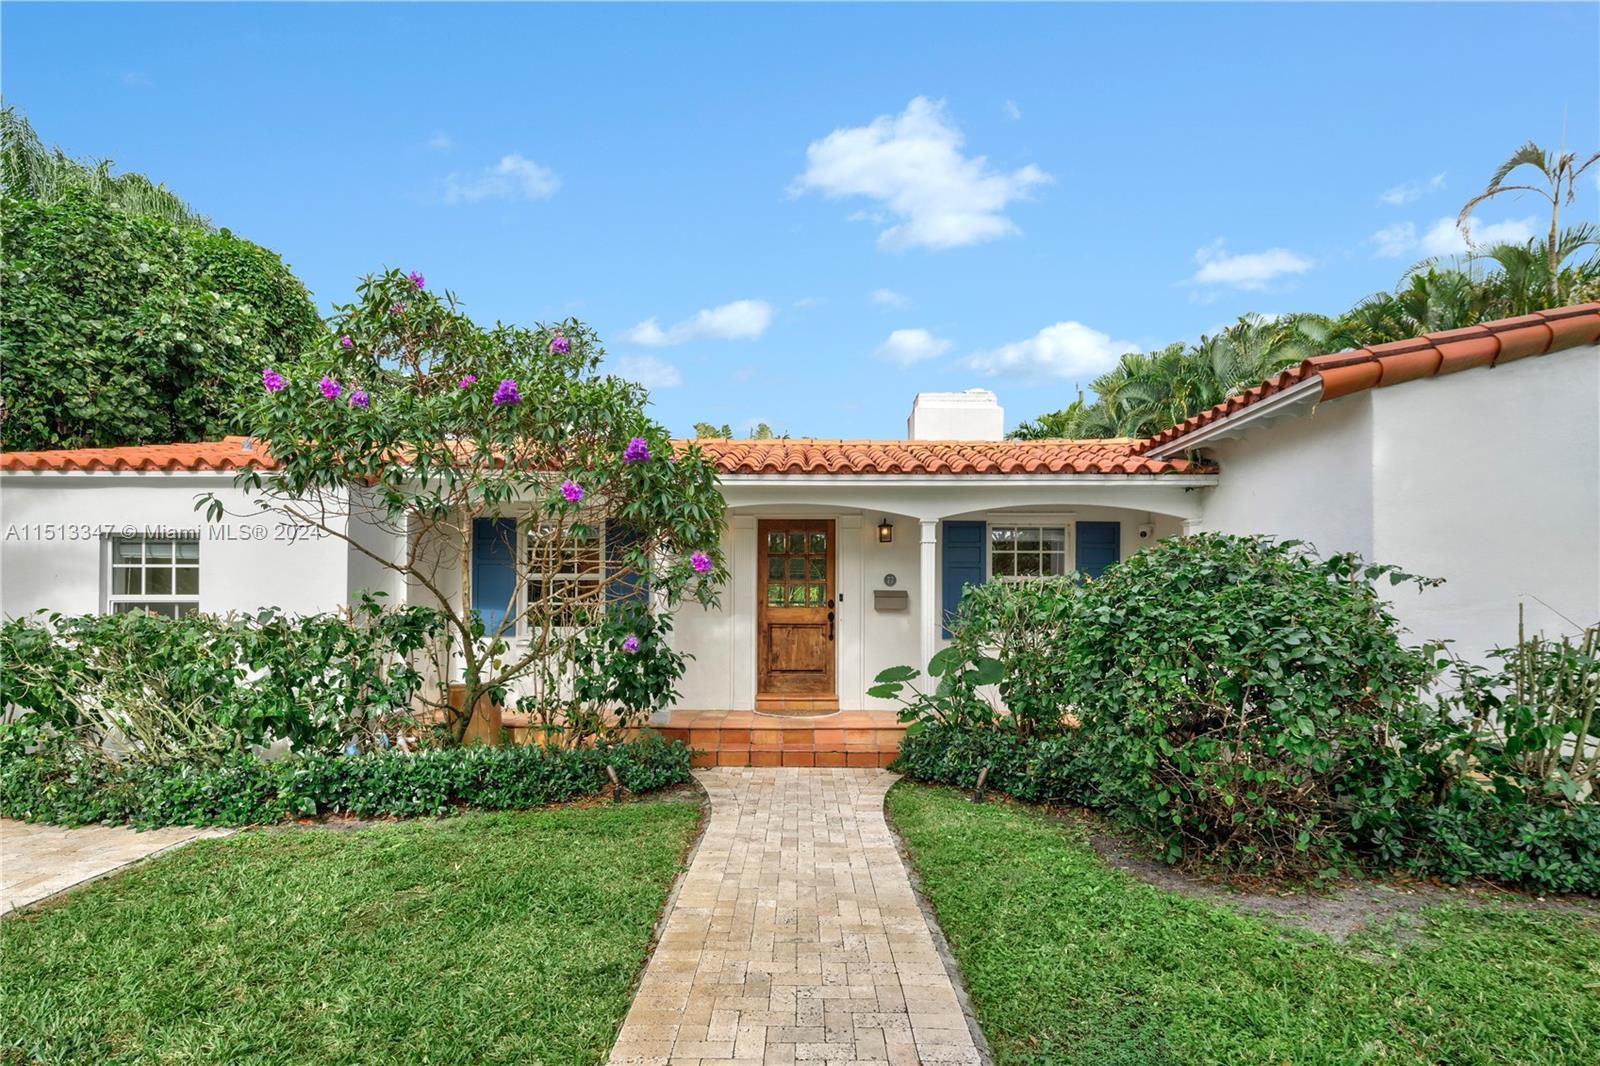 Miami Shores Gem, fully updated 1506 square foot home with 3 bedrooms and 2 bathrooms. The oversized